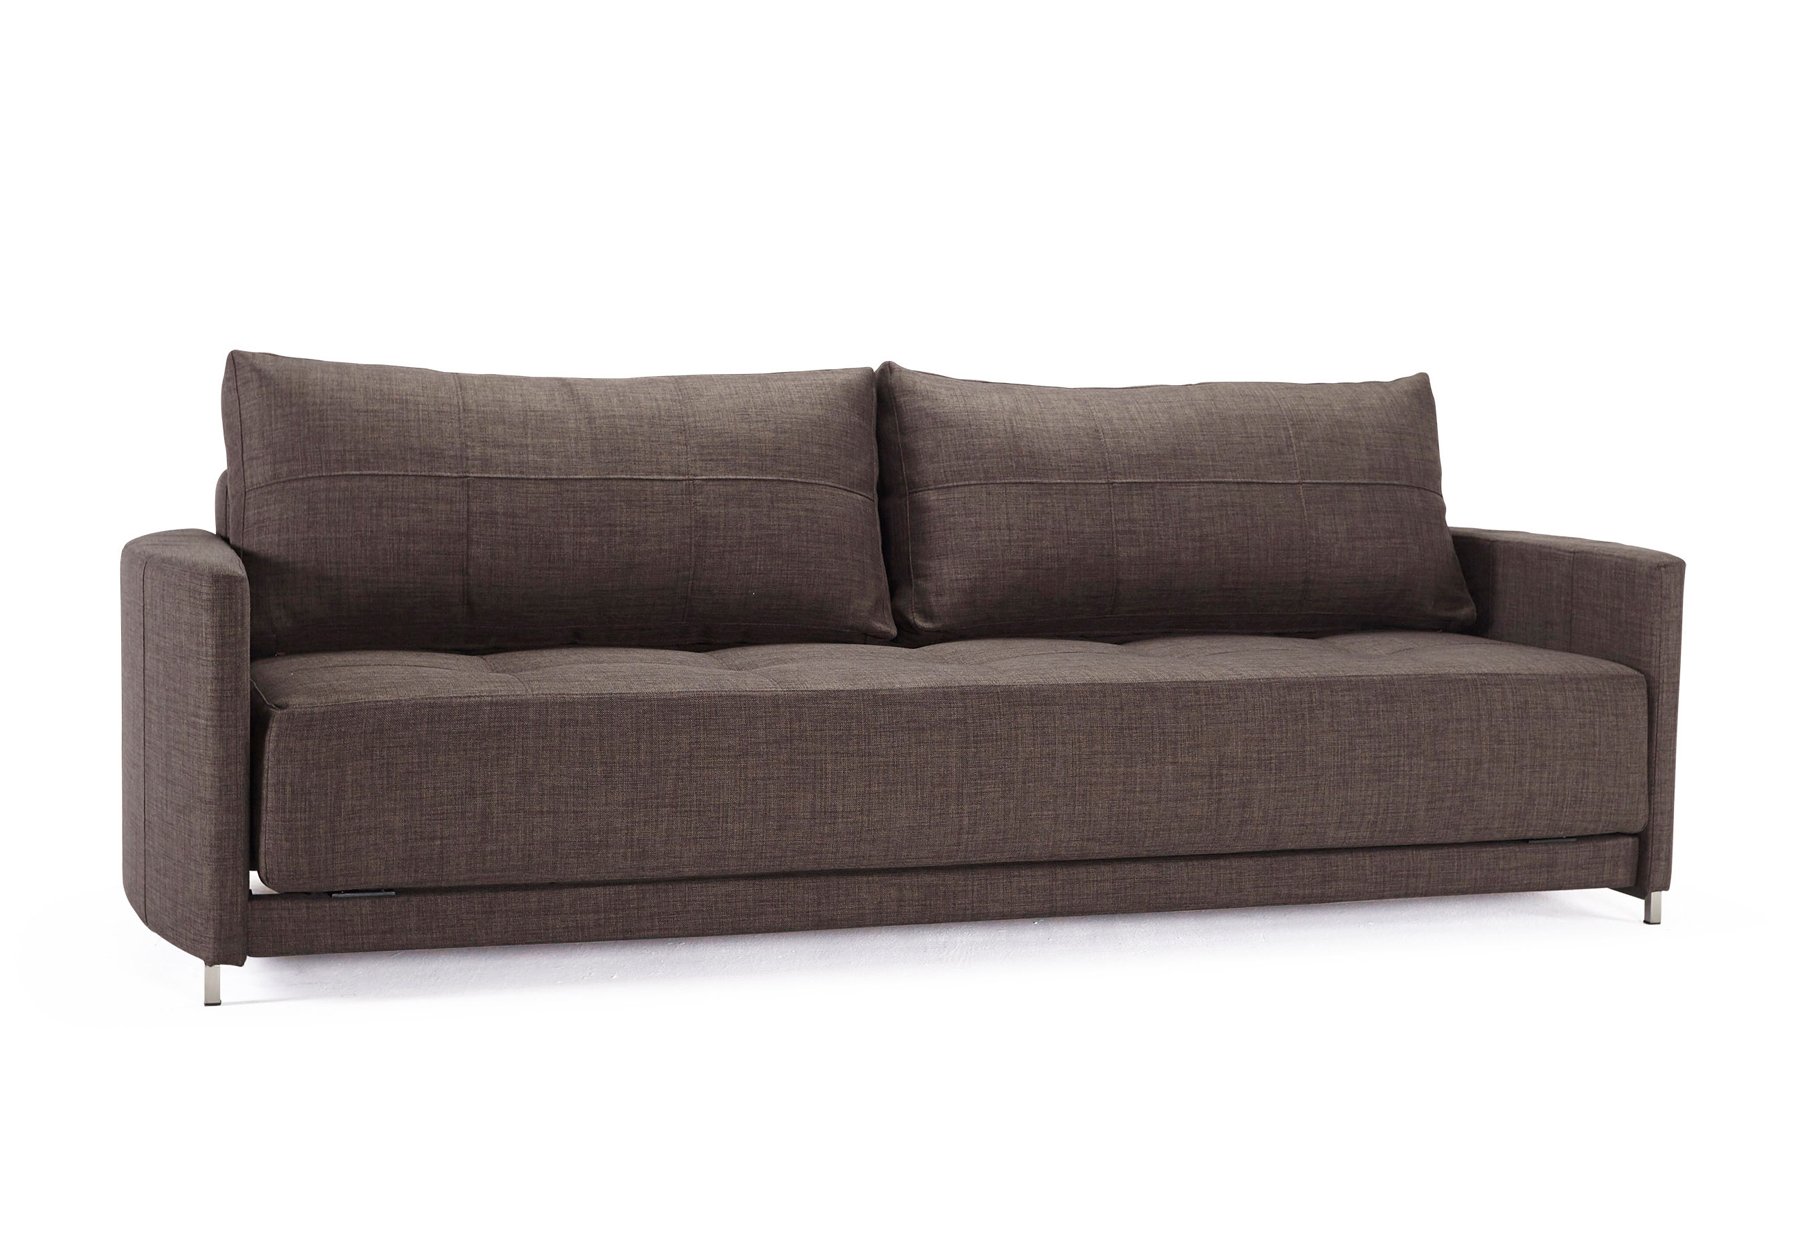 crescent deluxe excess sofa bed